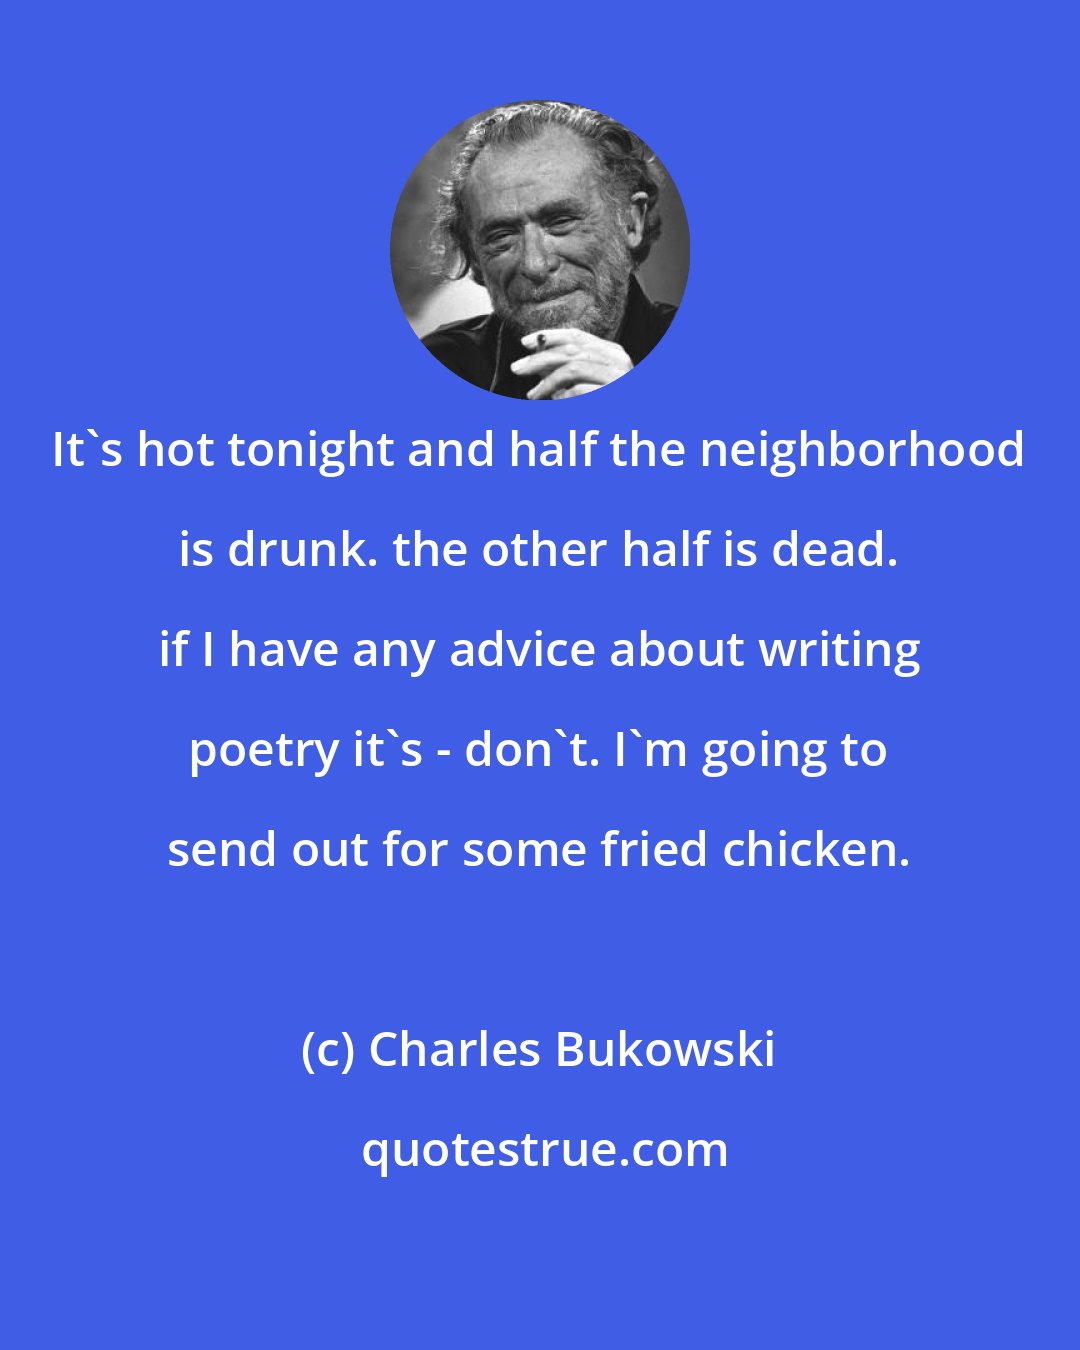 Charles Bukowski: It's hot tonight and half the neighborhood is drunk. the other half is dead. if I have any advice about writing poetry it's - don't. I'm going to send out for some fried chicken.